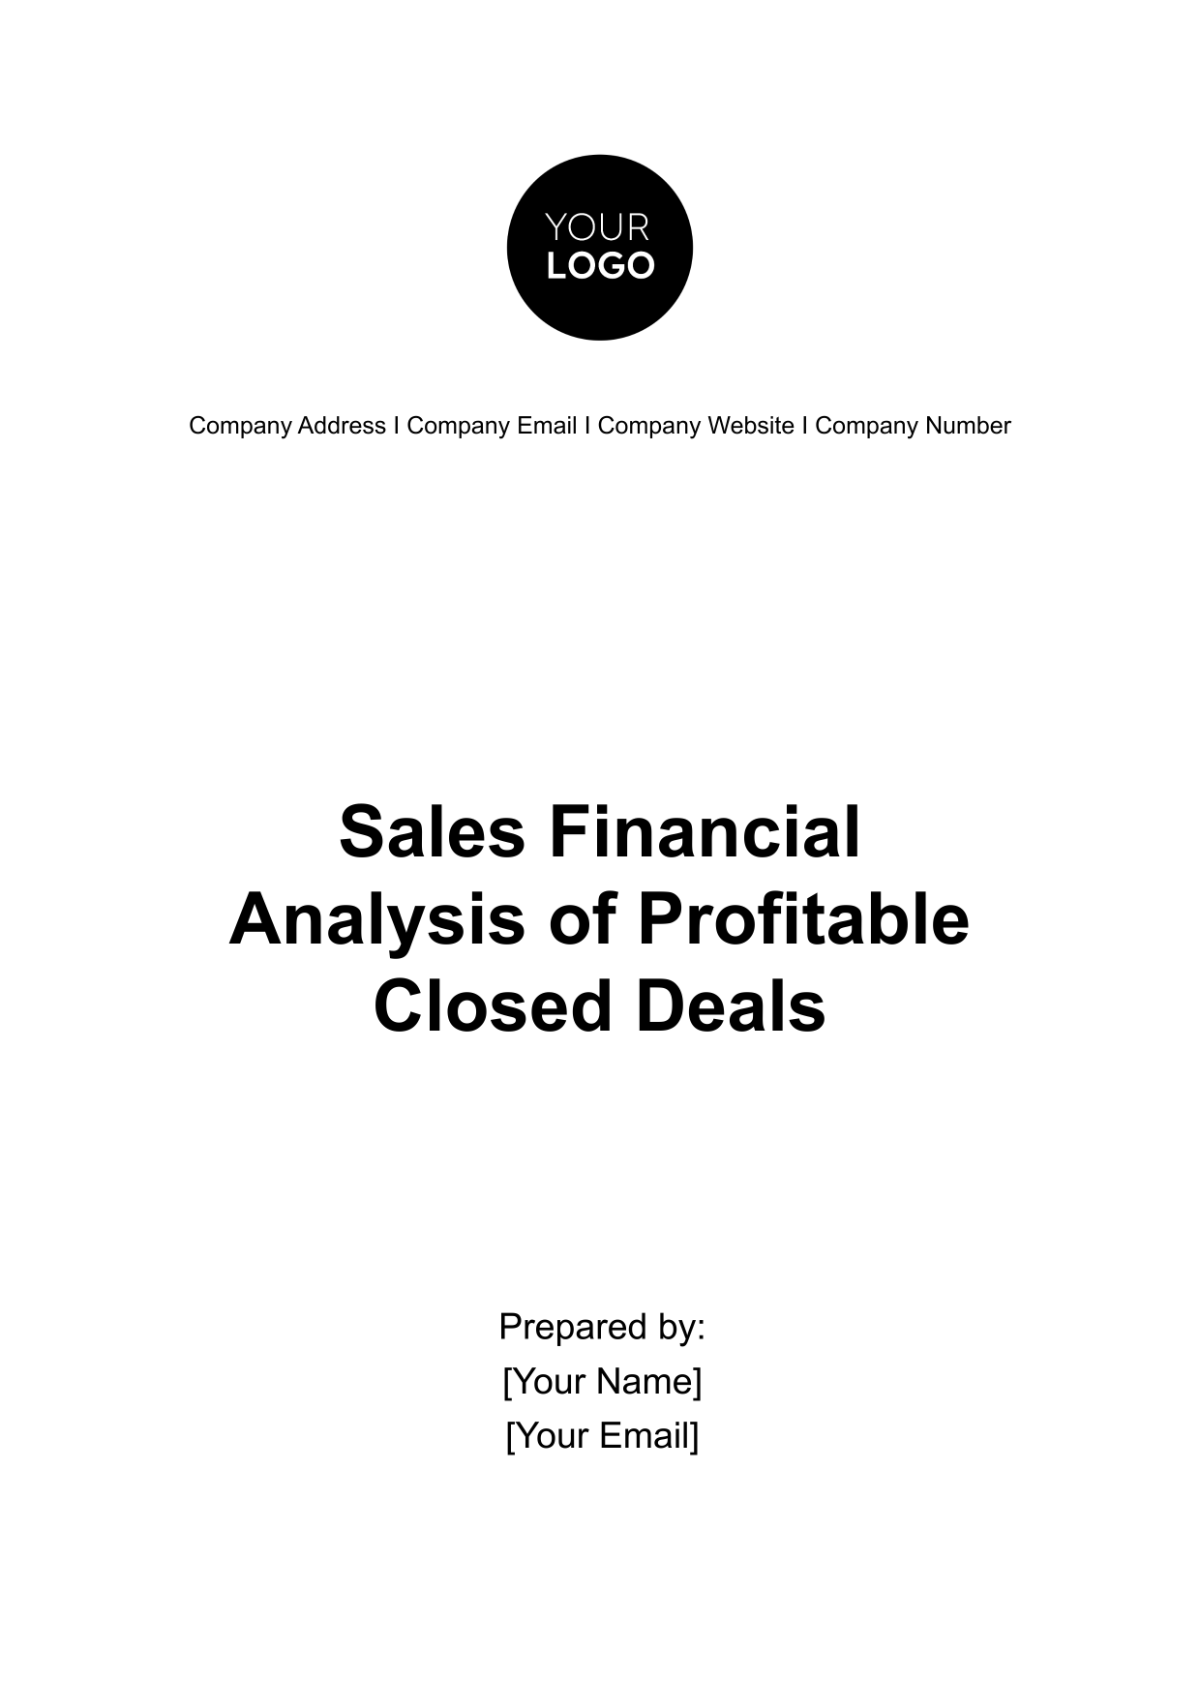 Free Sales Financial Analysis of Profitable Closed Deals Template